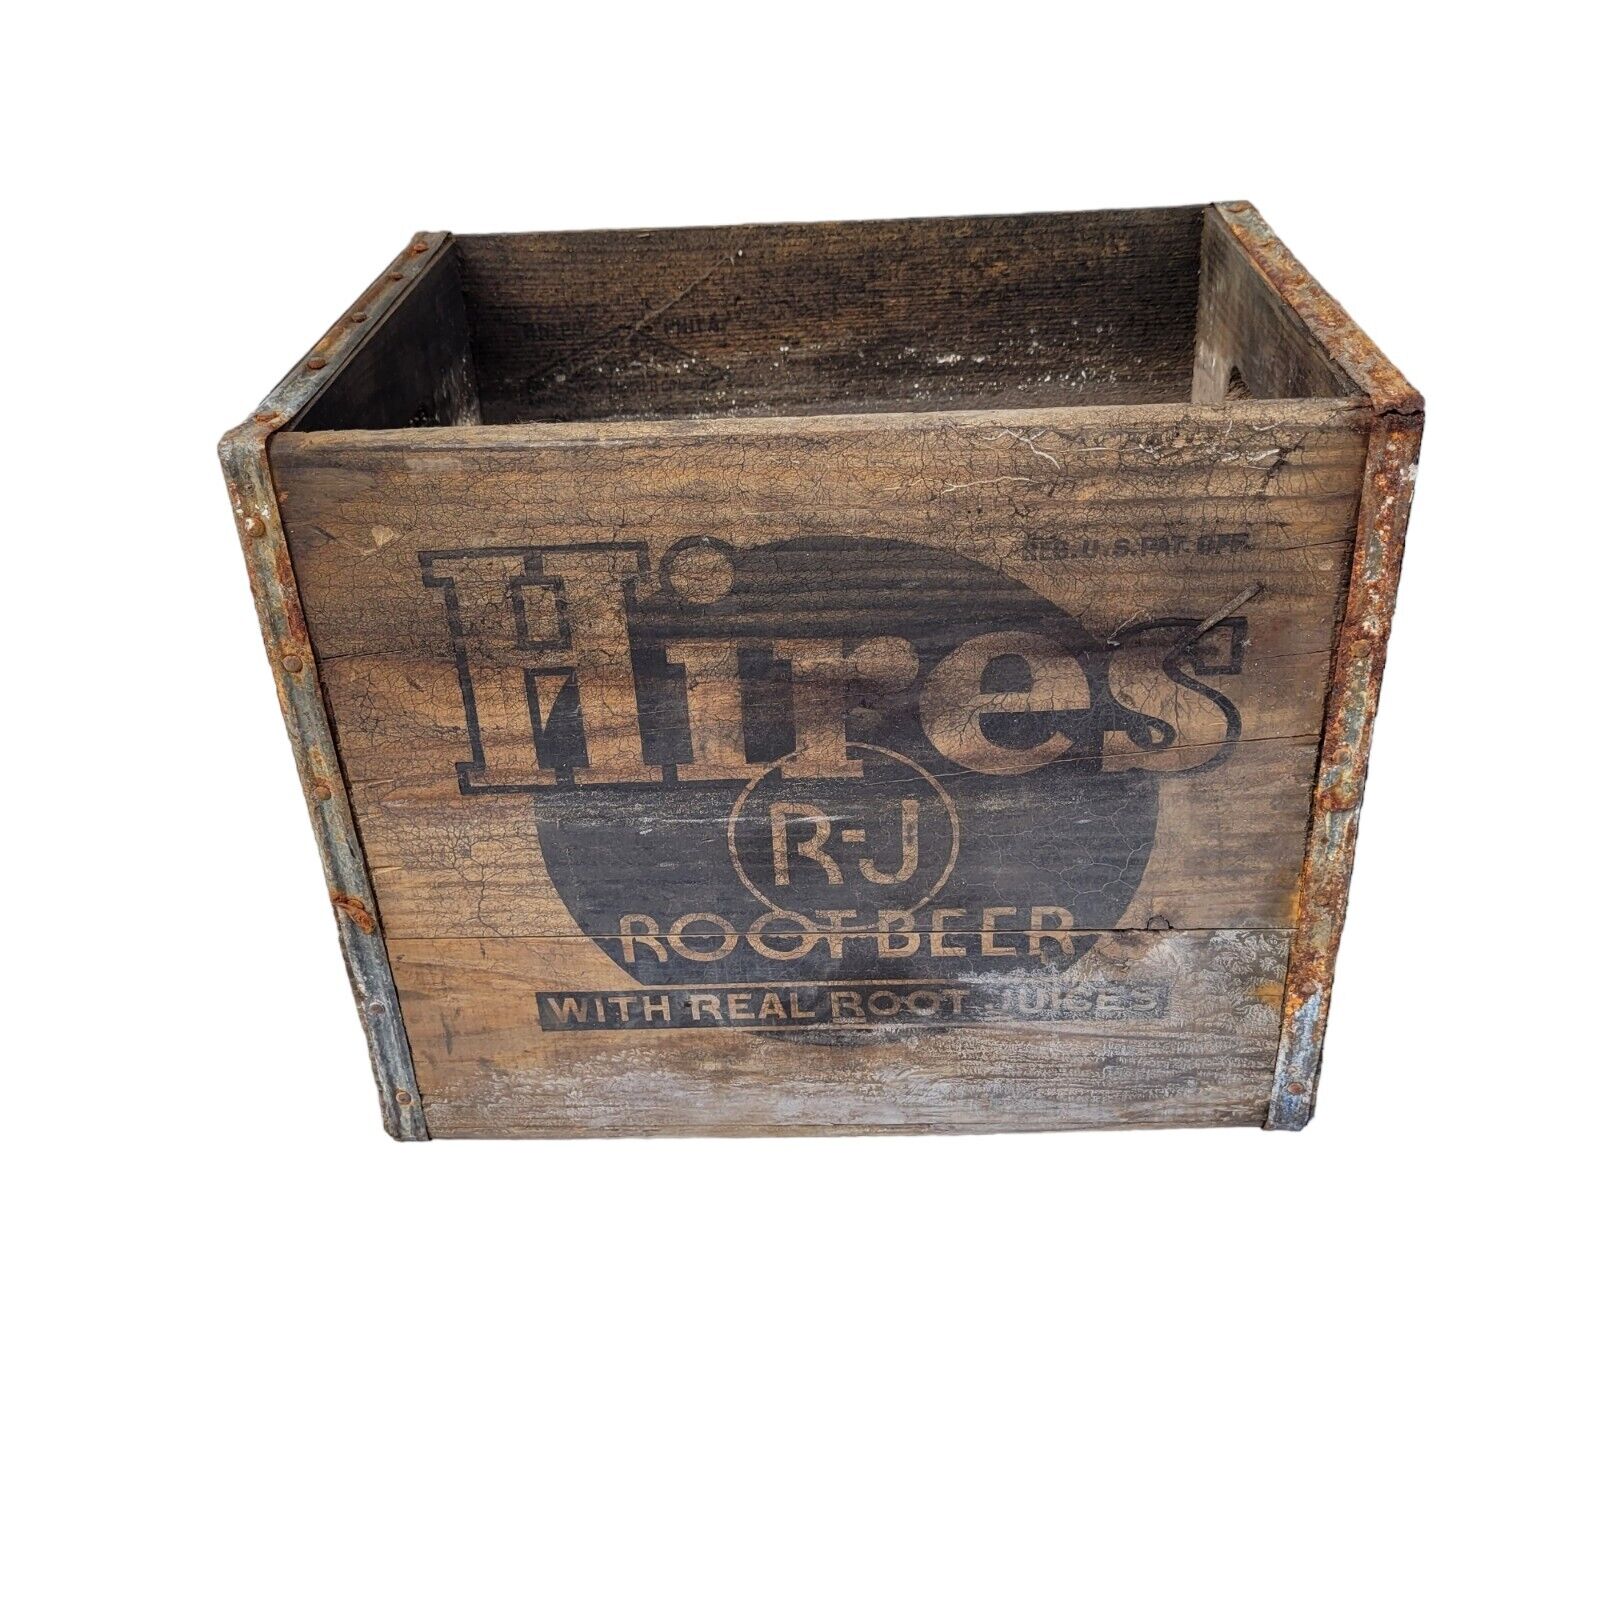 Rare Vintage Hires Root Beer  Wood  Wooden Case / Crate / Box